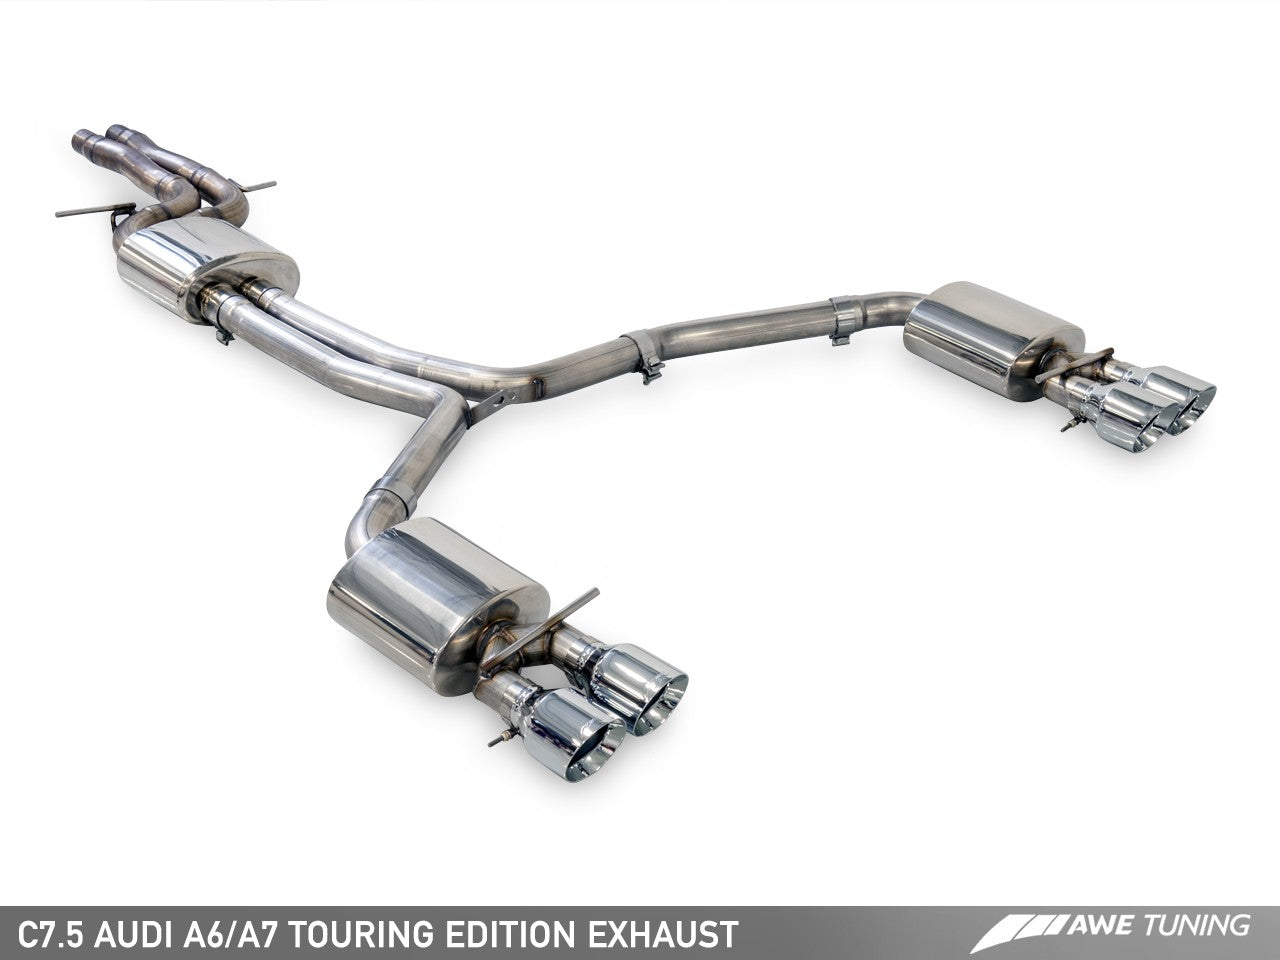 AWE Touring Edition Exhaust for Audi C7.5 A7 3.0T - Quad Outlet - Motorsports LA